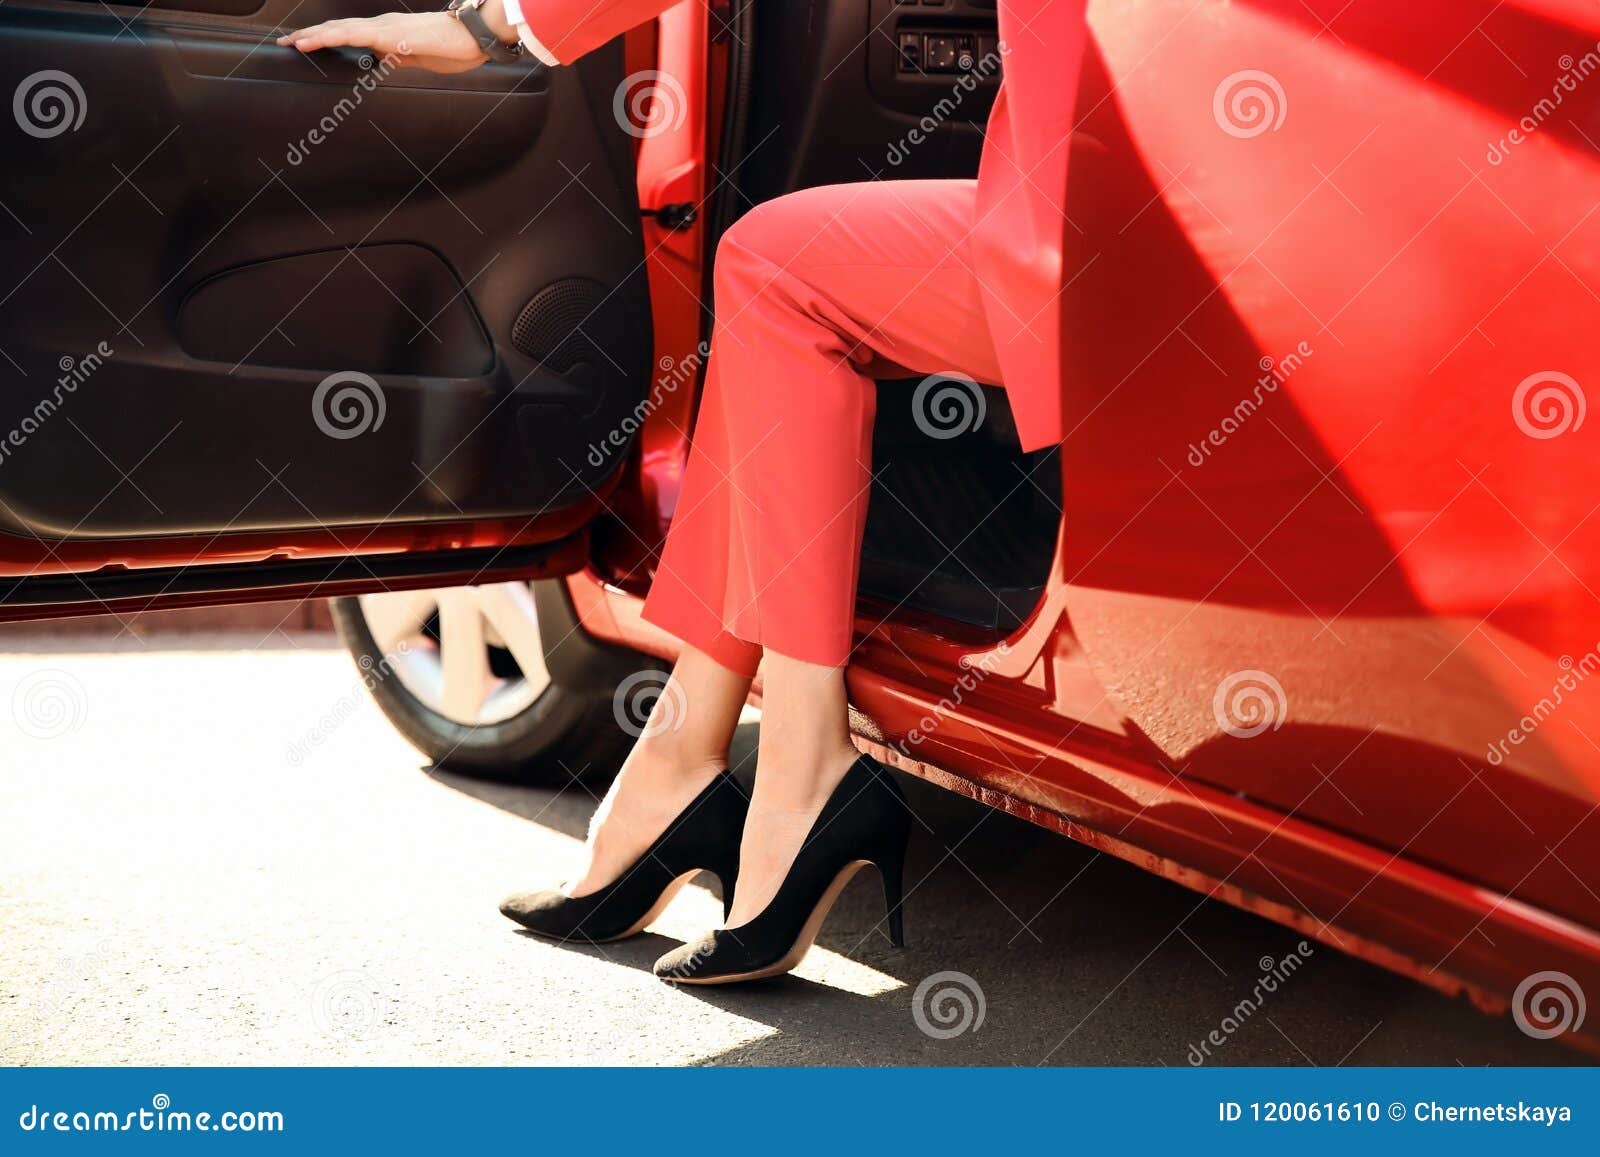 Businesswoman in Stylish Suit Getting Out of Car Stock Photo - Image of ...